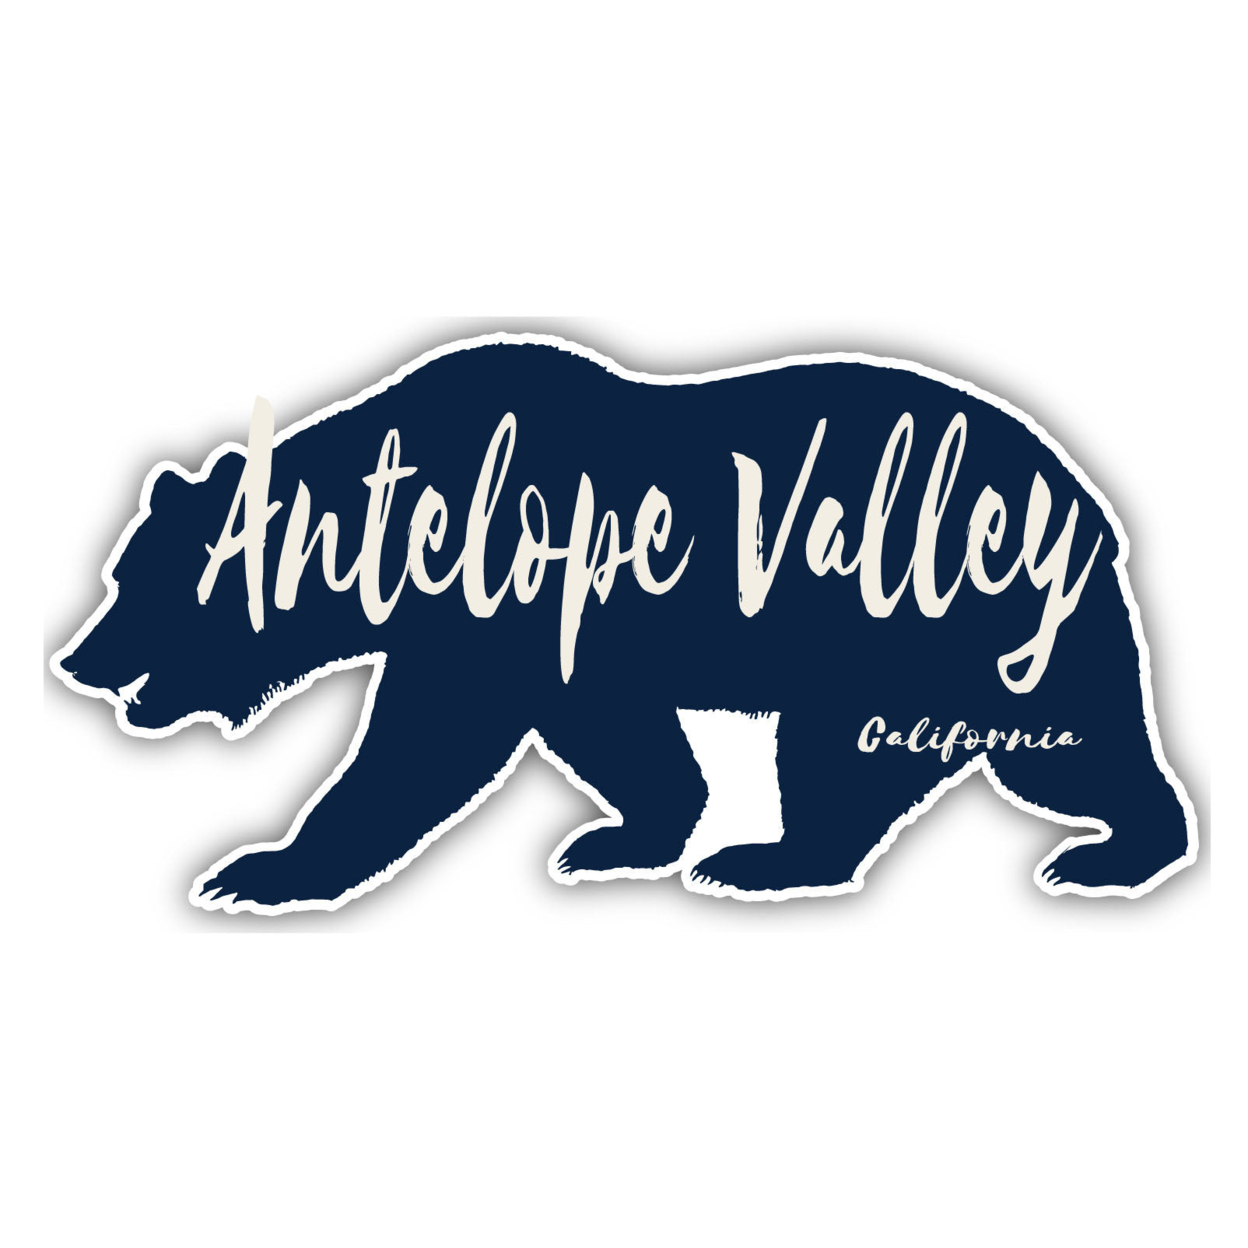 Antelope Valley California Souvenir Decorative Stickers (Choose Theme And Size) - 4-Pack, 8-Inch, Camp Life